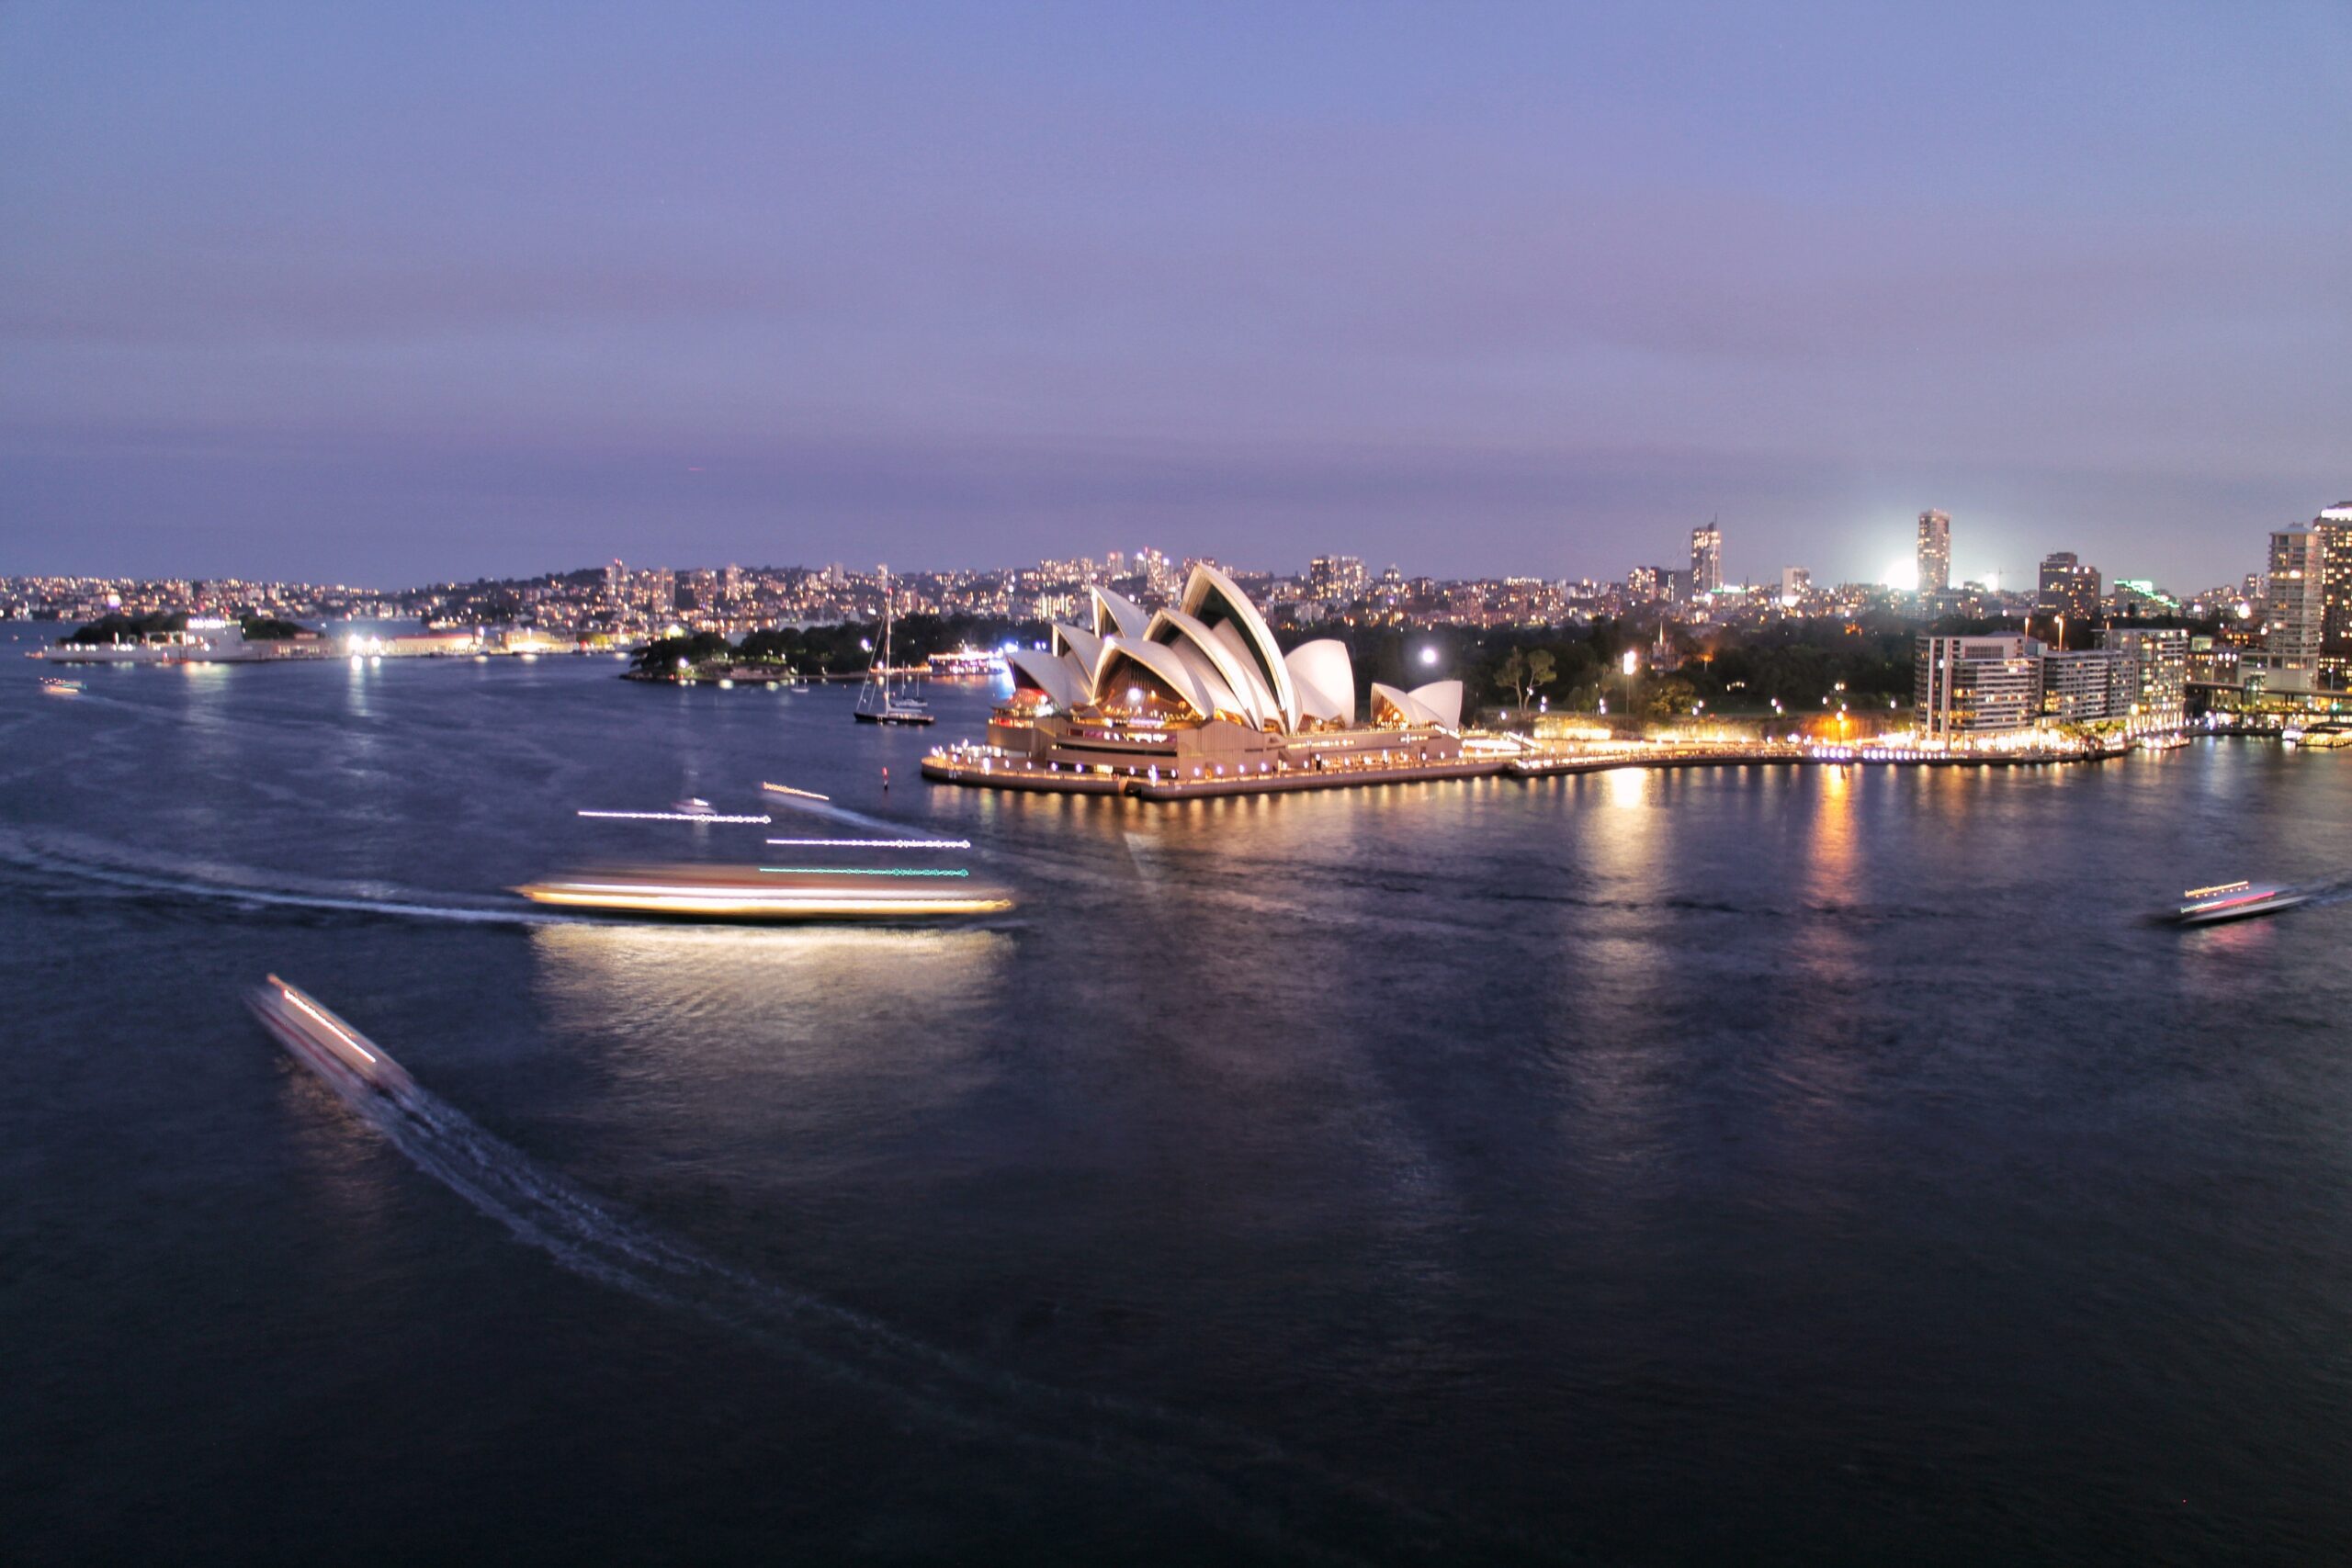 A view of sydney harbor